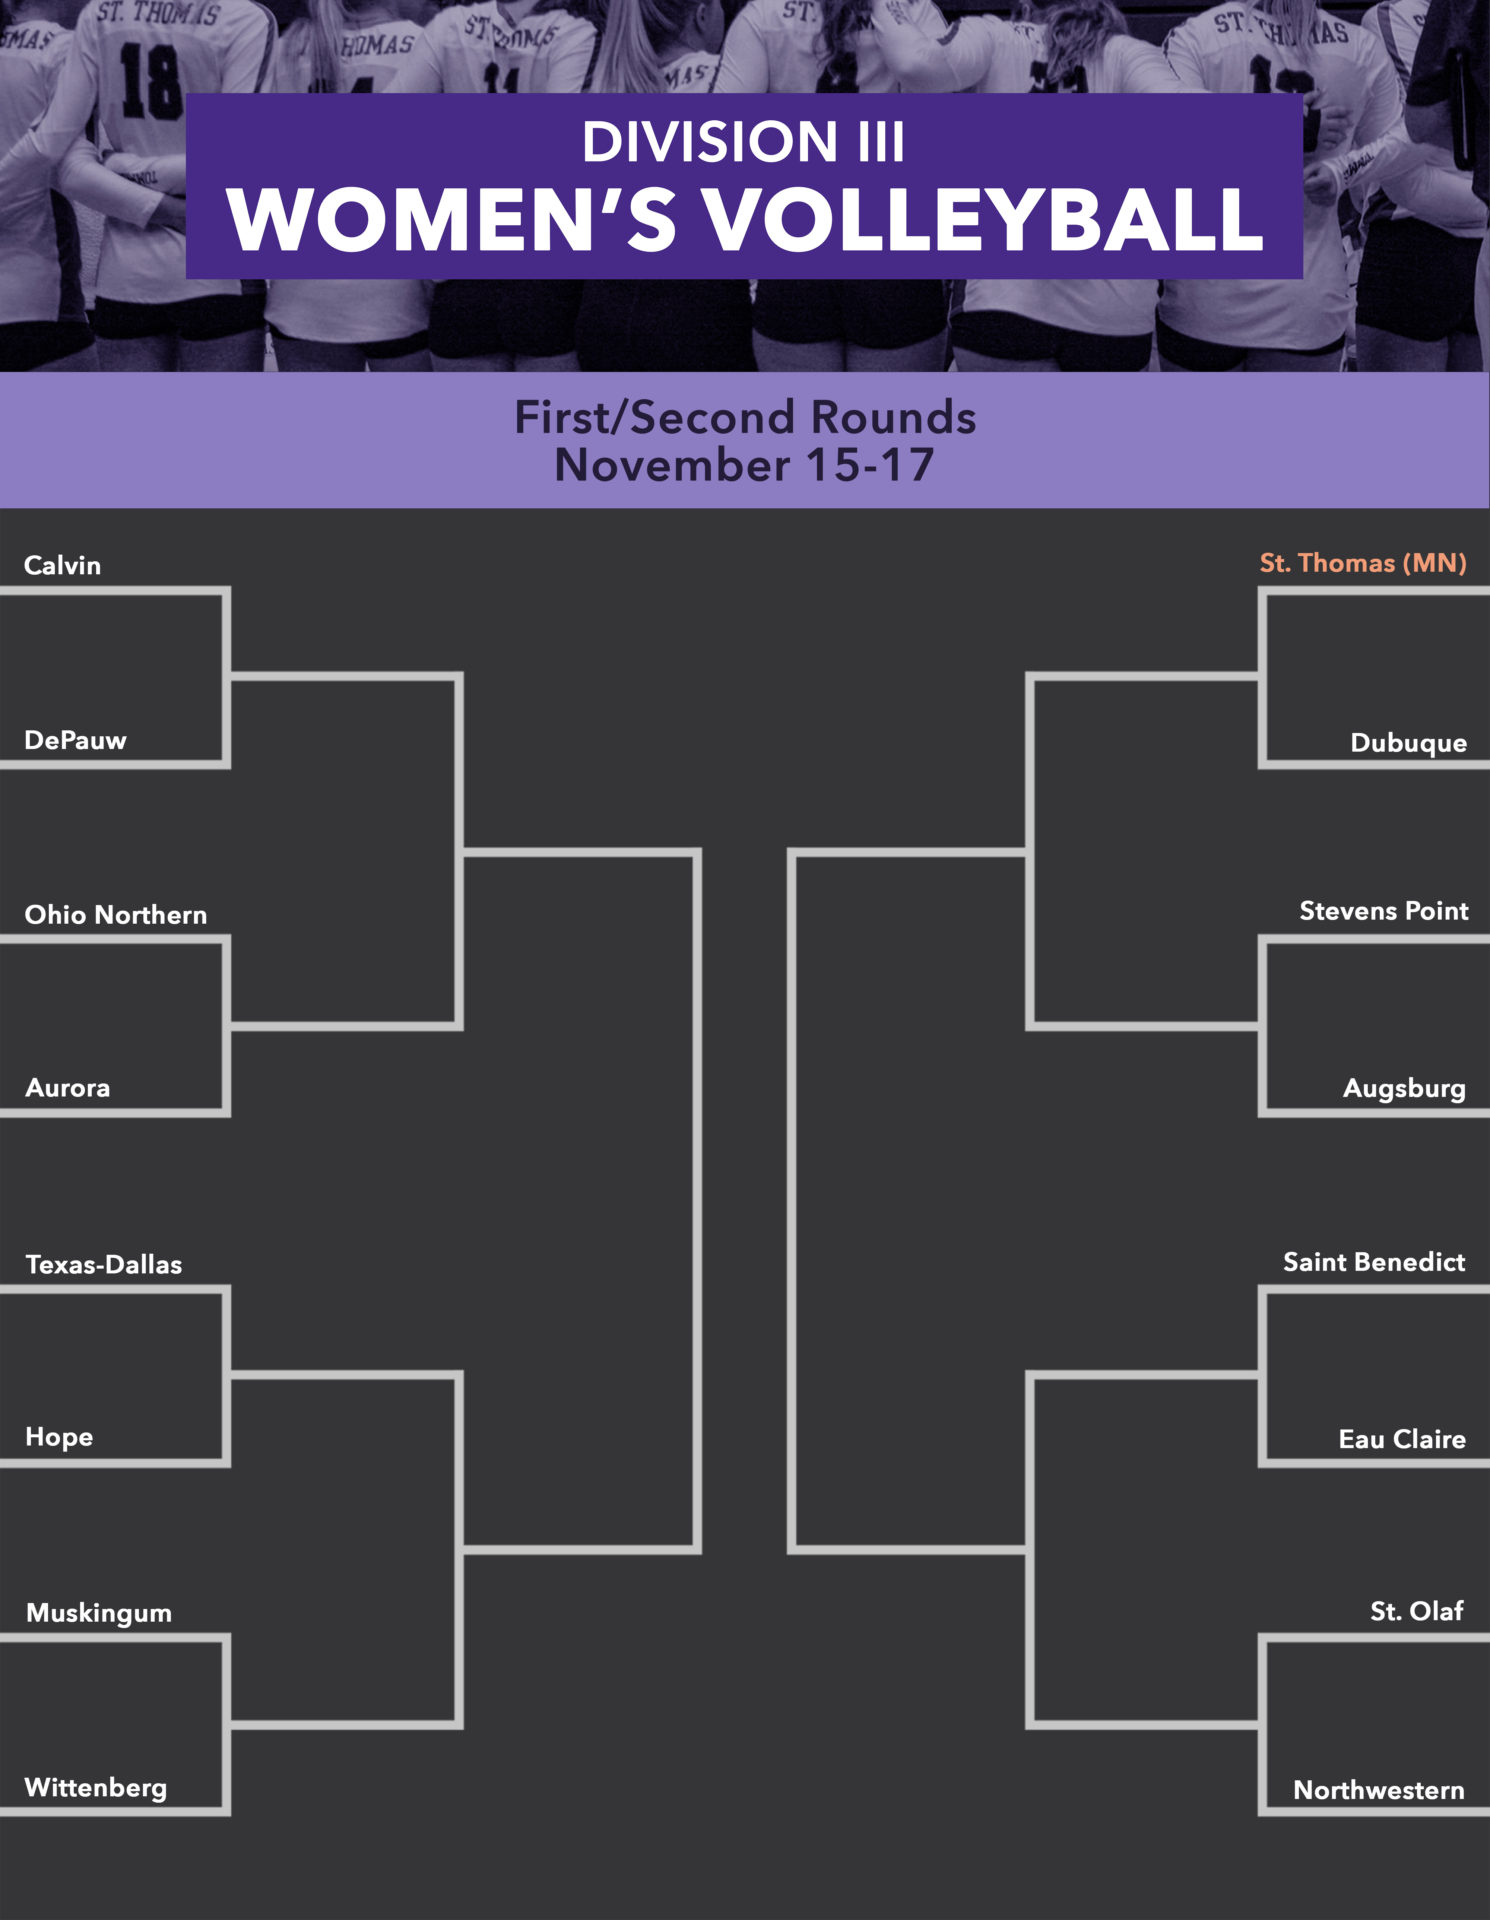 INFOGRAPHIC NCAA Divison III volleyball playoffs announced TommieMedia